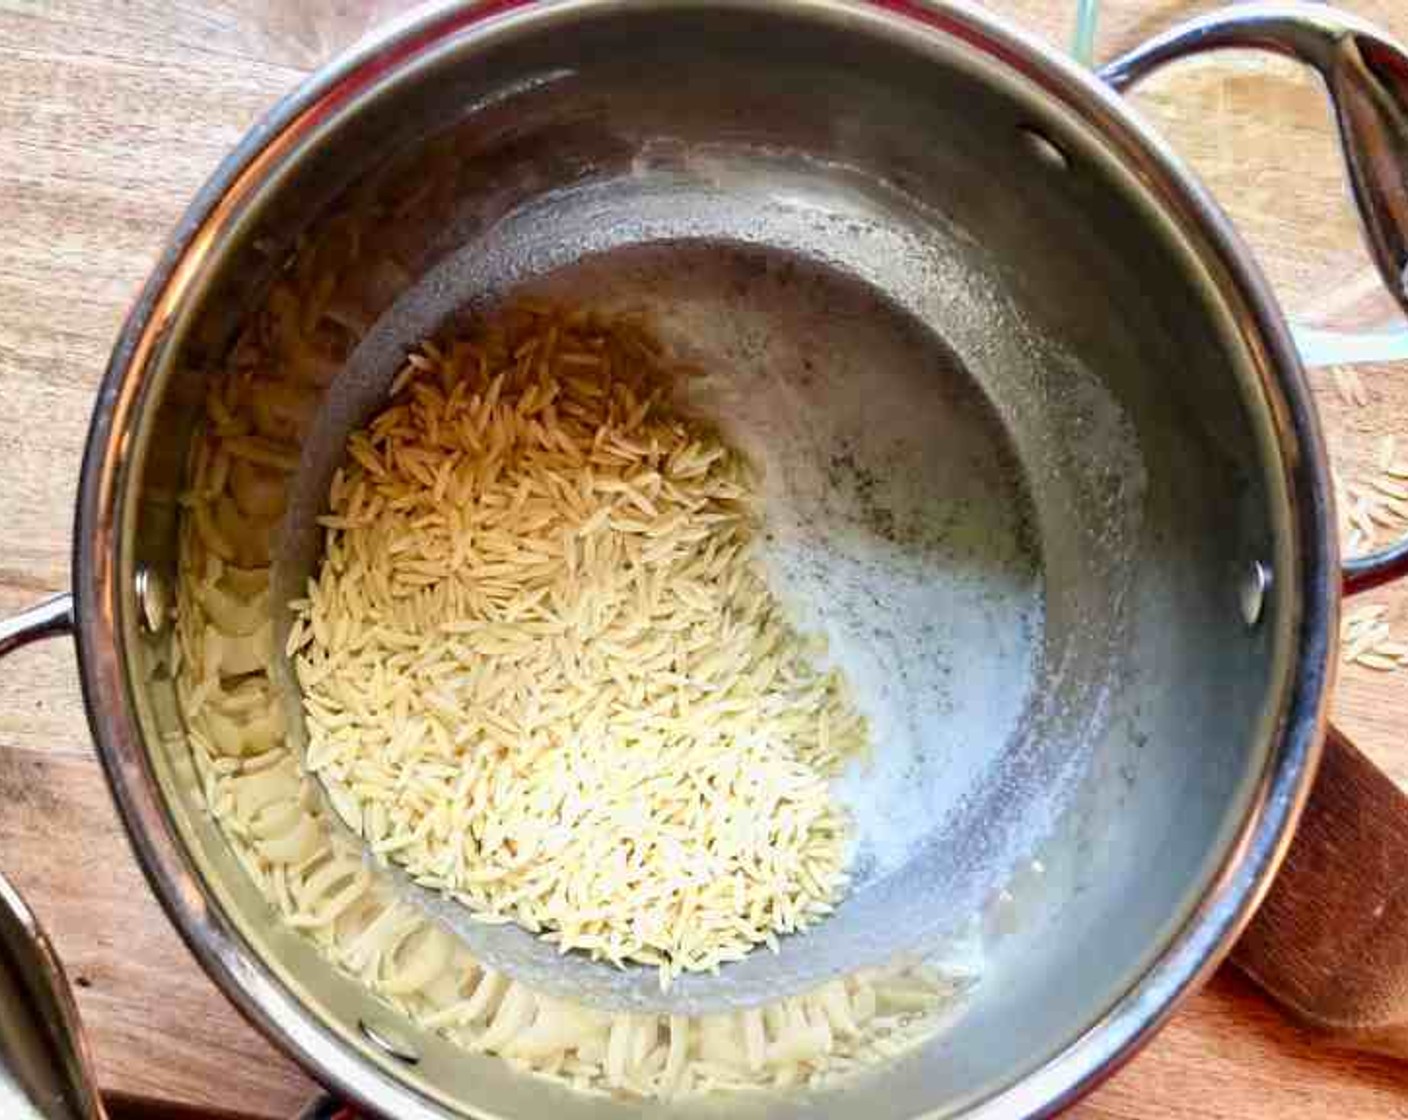 step 1 Heat a medium pot over medium-high heat, add Butter (1/4 cup). When the butter is melted, add the Orzo Pasta (3/4 cup) and cook for about 2 minutes or until lightly toasted and golden, stirring often. Keep a close watch so the orzo doesn't burn.